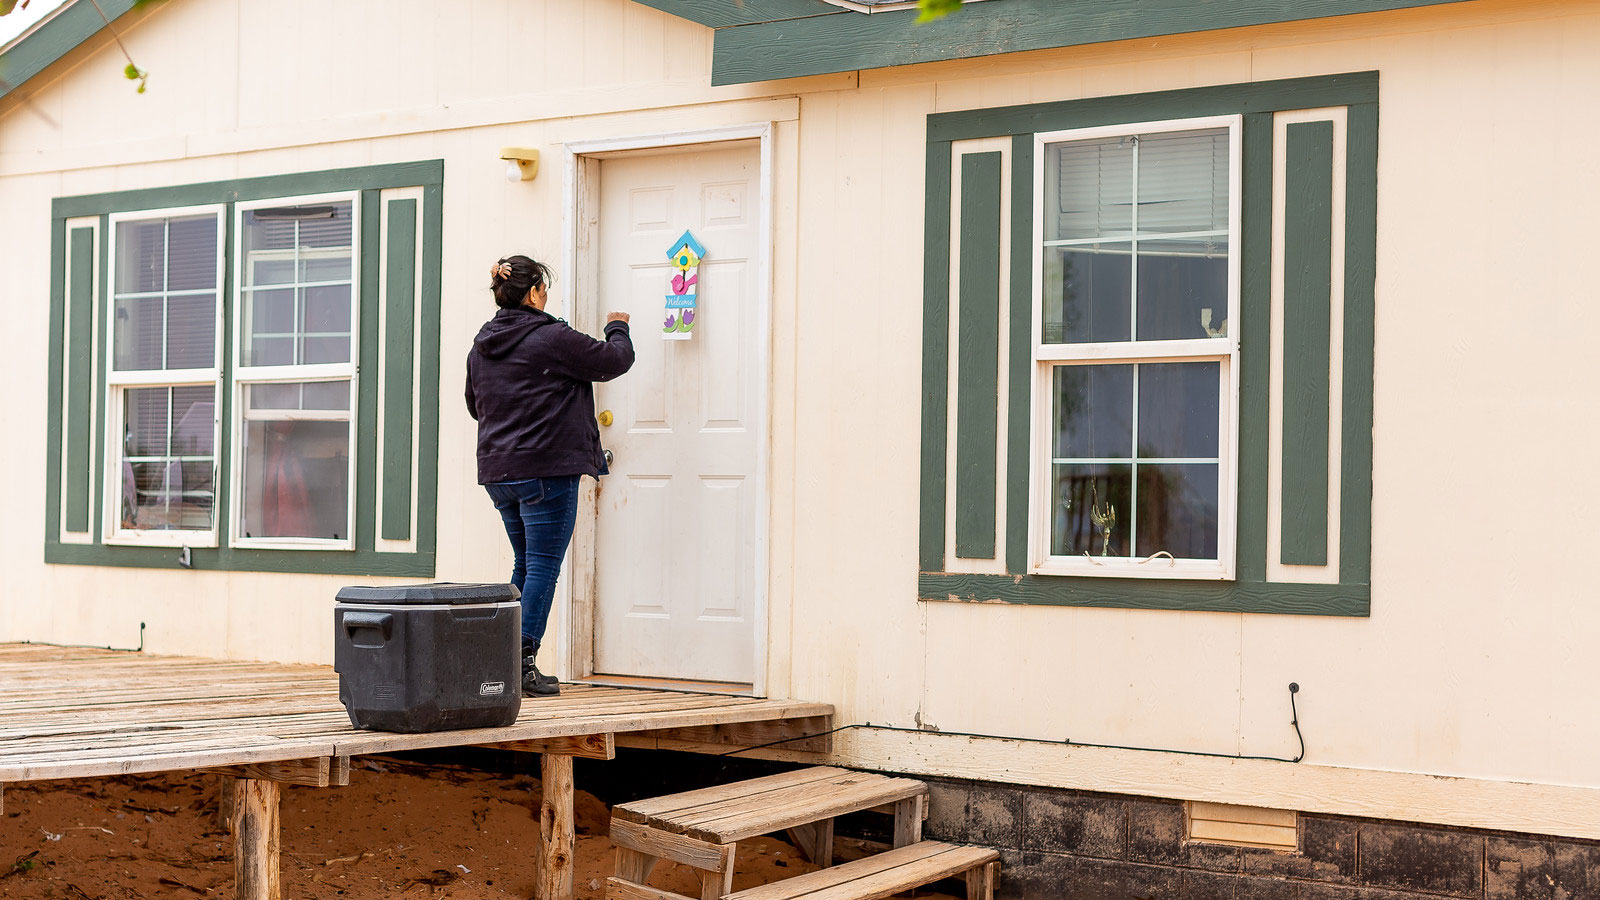 Tara Benally, a field director for Rural Arizona Project, conducts door-knocking efforts on the Navajo Nation as a part of a voter registration program in 2019. (Madeline McGill/Rural Utah Project)